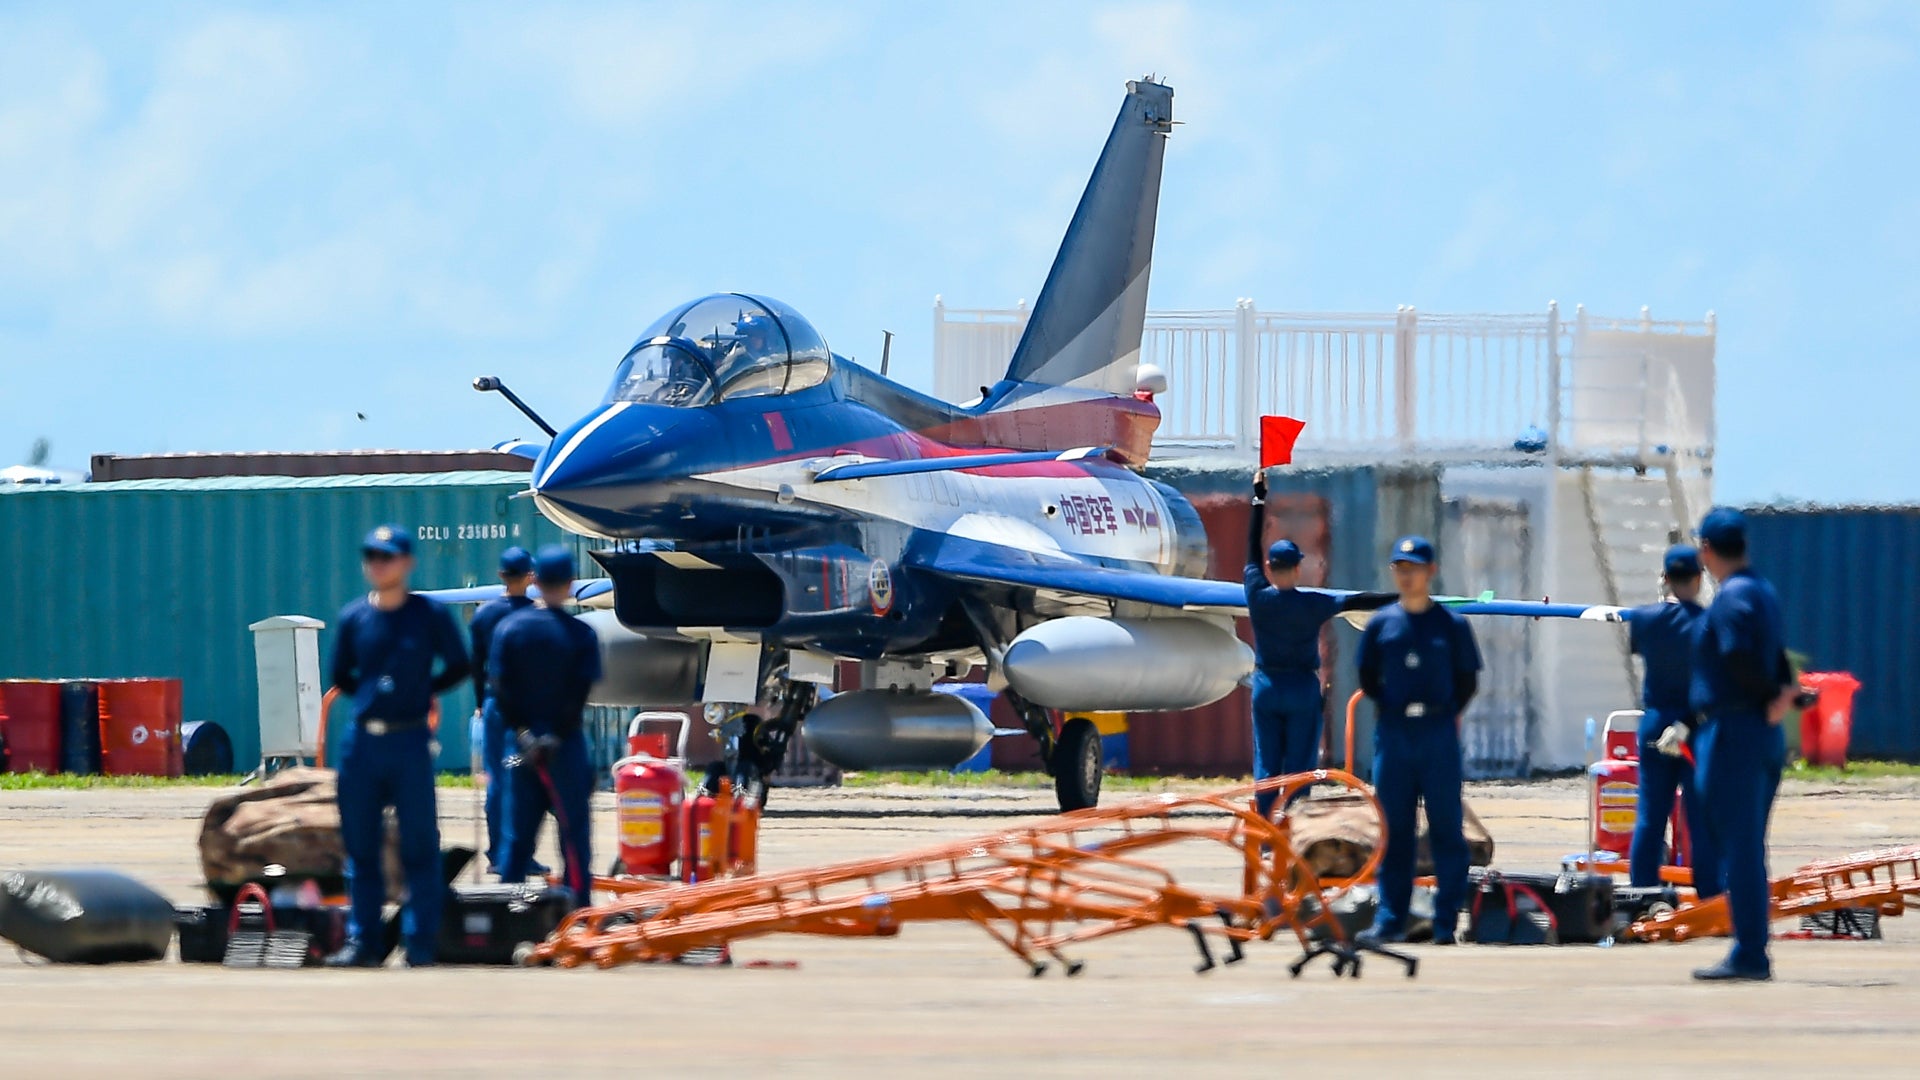 A fighter jet of the Bayi Aerobatics Team of the Chinese People's Liberation Army (PLA) Air Force arrives at Zhuhai International Airshow Center before Airshow China 2021 on September 22, 2021 in Zhuhai, Guangdong Province of China. (Photo by Chen Jimin/China News Service via Getty Images)